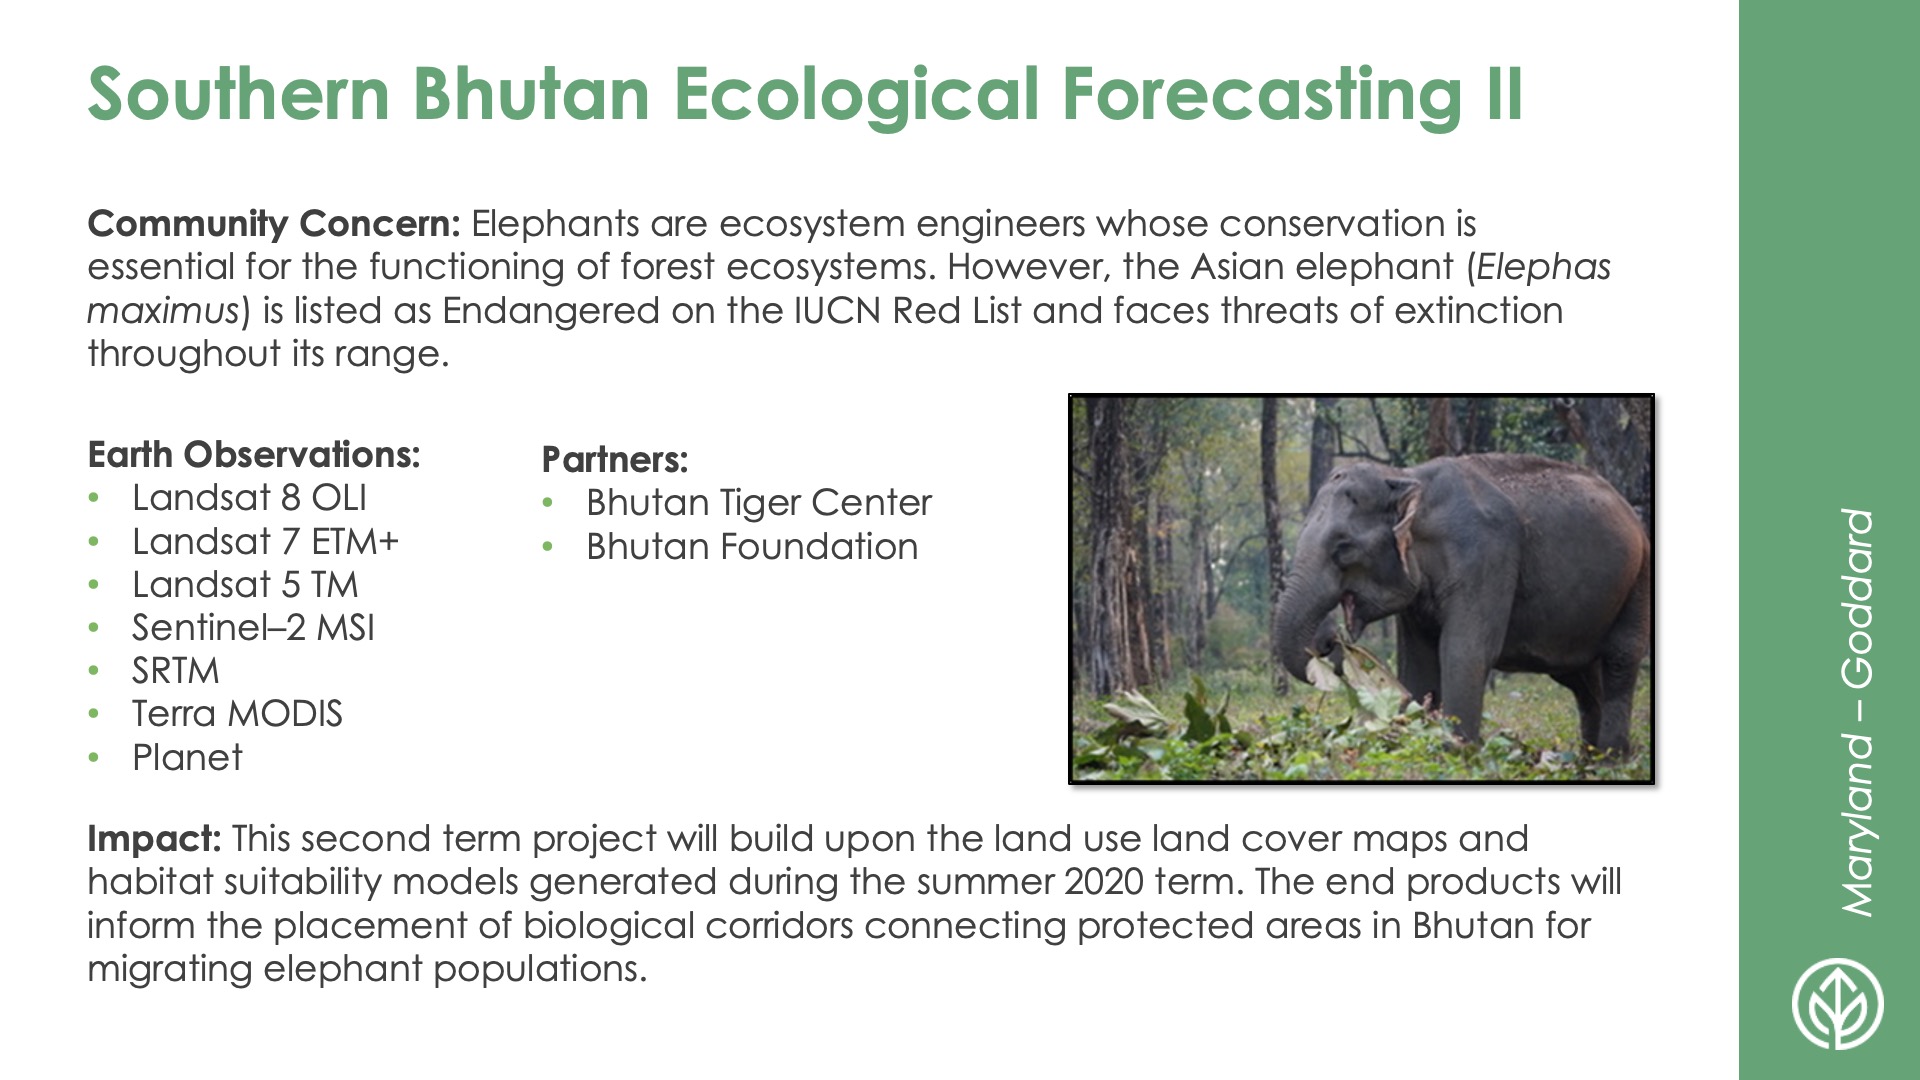 Slide title: Southern Bhutan Ecological Forecasting IIDEVELOP Node: Maryland - GoddardCommunity Concern: Elephants are ecosystem engineers whose conservation is essential for the functioning of forest ecosystems. However, the Asian elephant (Elephas maximus) is listed as Endangered on the IUCN Red List and faces threats of extinction throughout its range.Impact: This second term project will build upon the land use land cover maps and habitat suitability models generated during the summer 2020 term. The end products will inform the placement of biological corridors connecting protected areas in Bhutan for migrating elephant populations.Partners: Bhutan Tiger Center, Bhutan FoundationEarth Observations: Landsat 8 OLI, Landsat 7 ETM+, Landsat 5 TM, Sentinel–2 MSI, SRTM, Terra MODIS, Planet